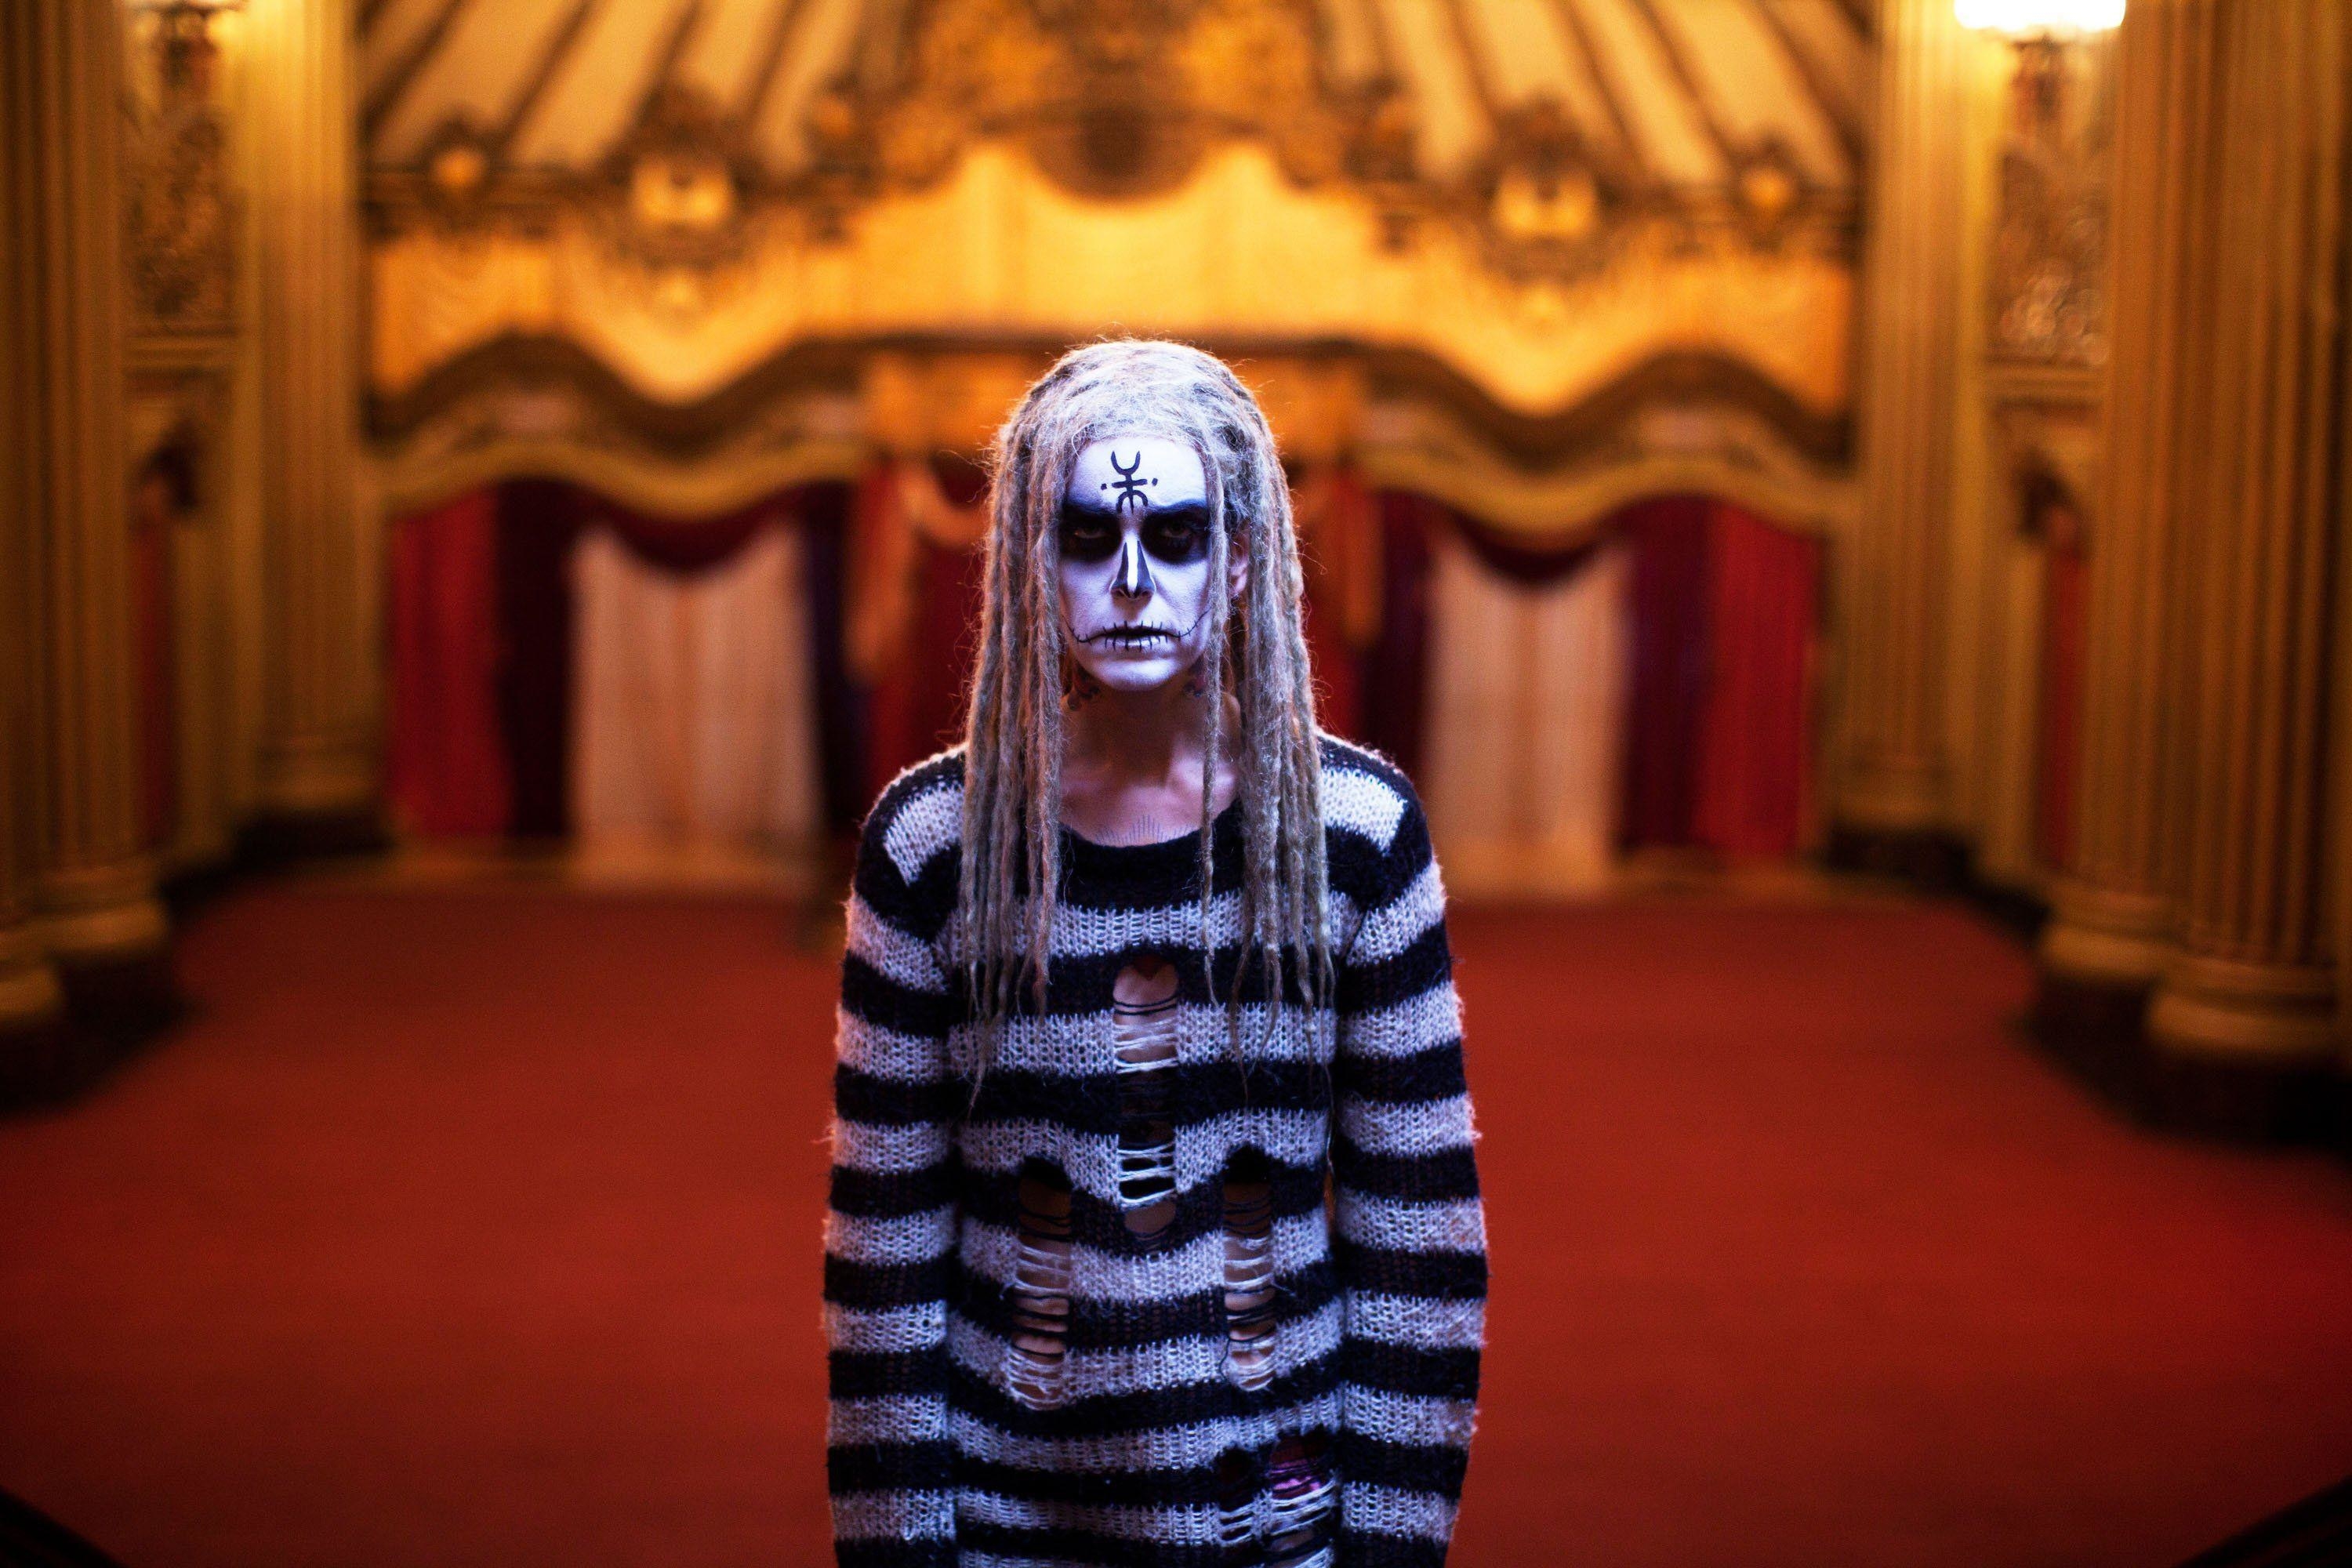 A woman in creepy make-up and a long worn-out sweater stands in an ornate ballroom